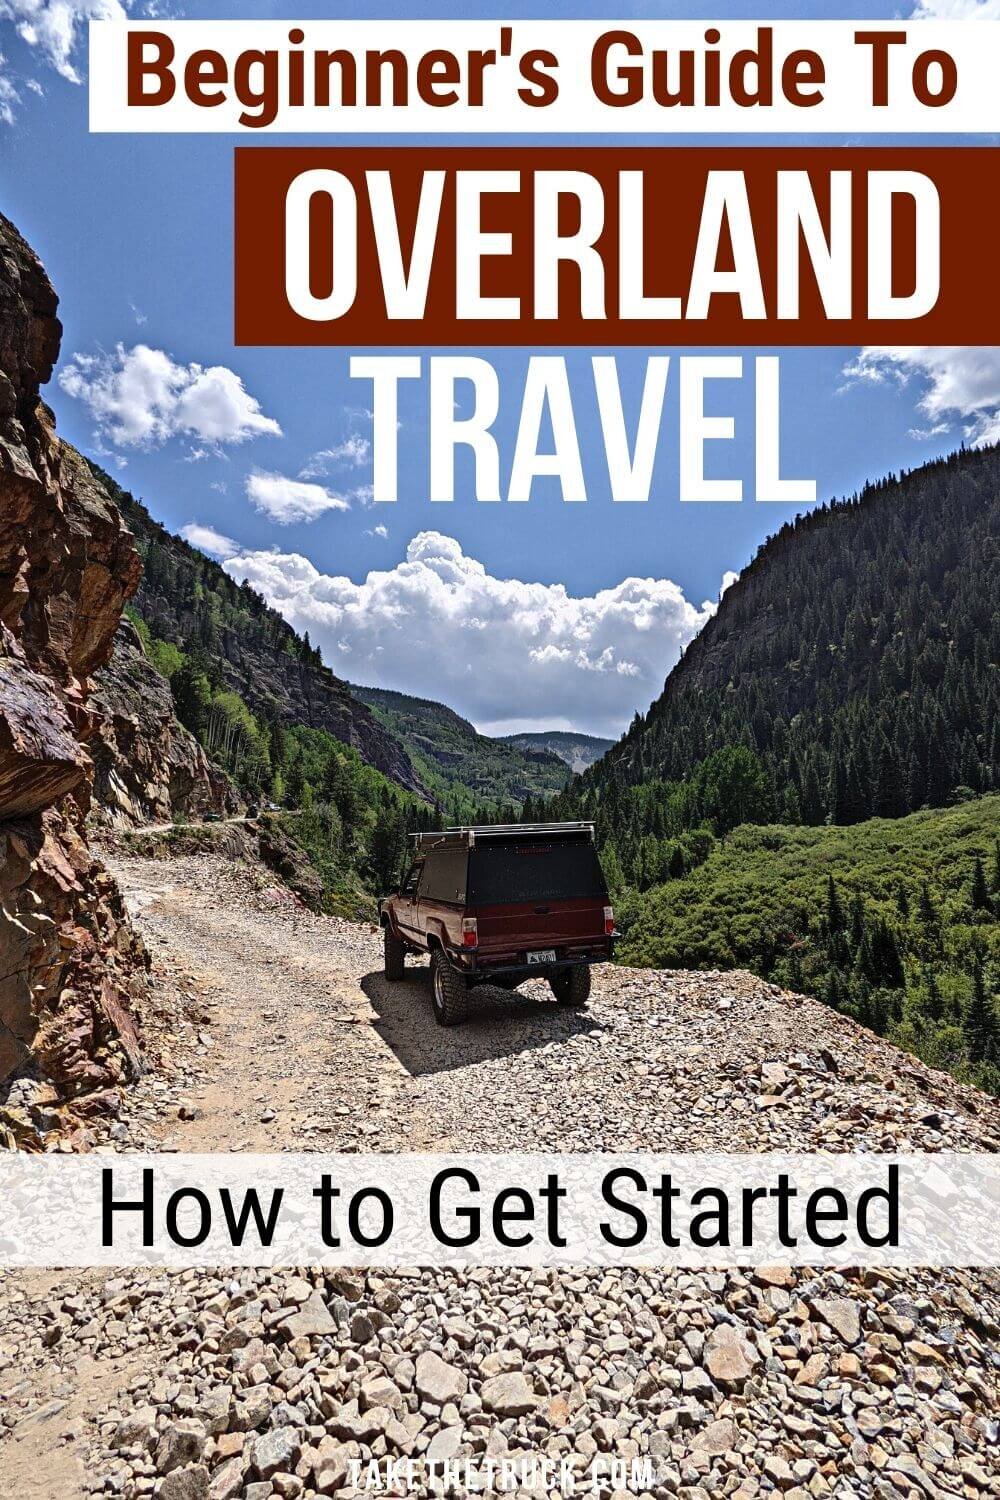 Overlanding &amp; overland travel resource: overlanding for beginners, budget overlanding, overlanding gear &amp; recovery, overland vehicles, overlanding destinations &amp; routes, overlanding tips